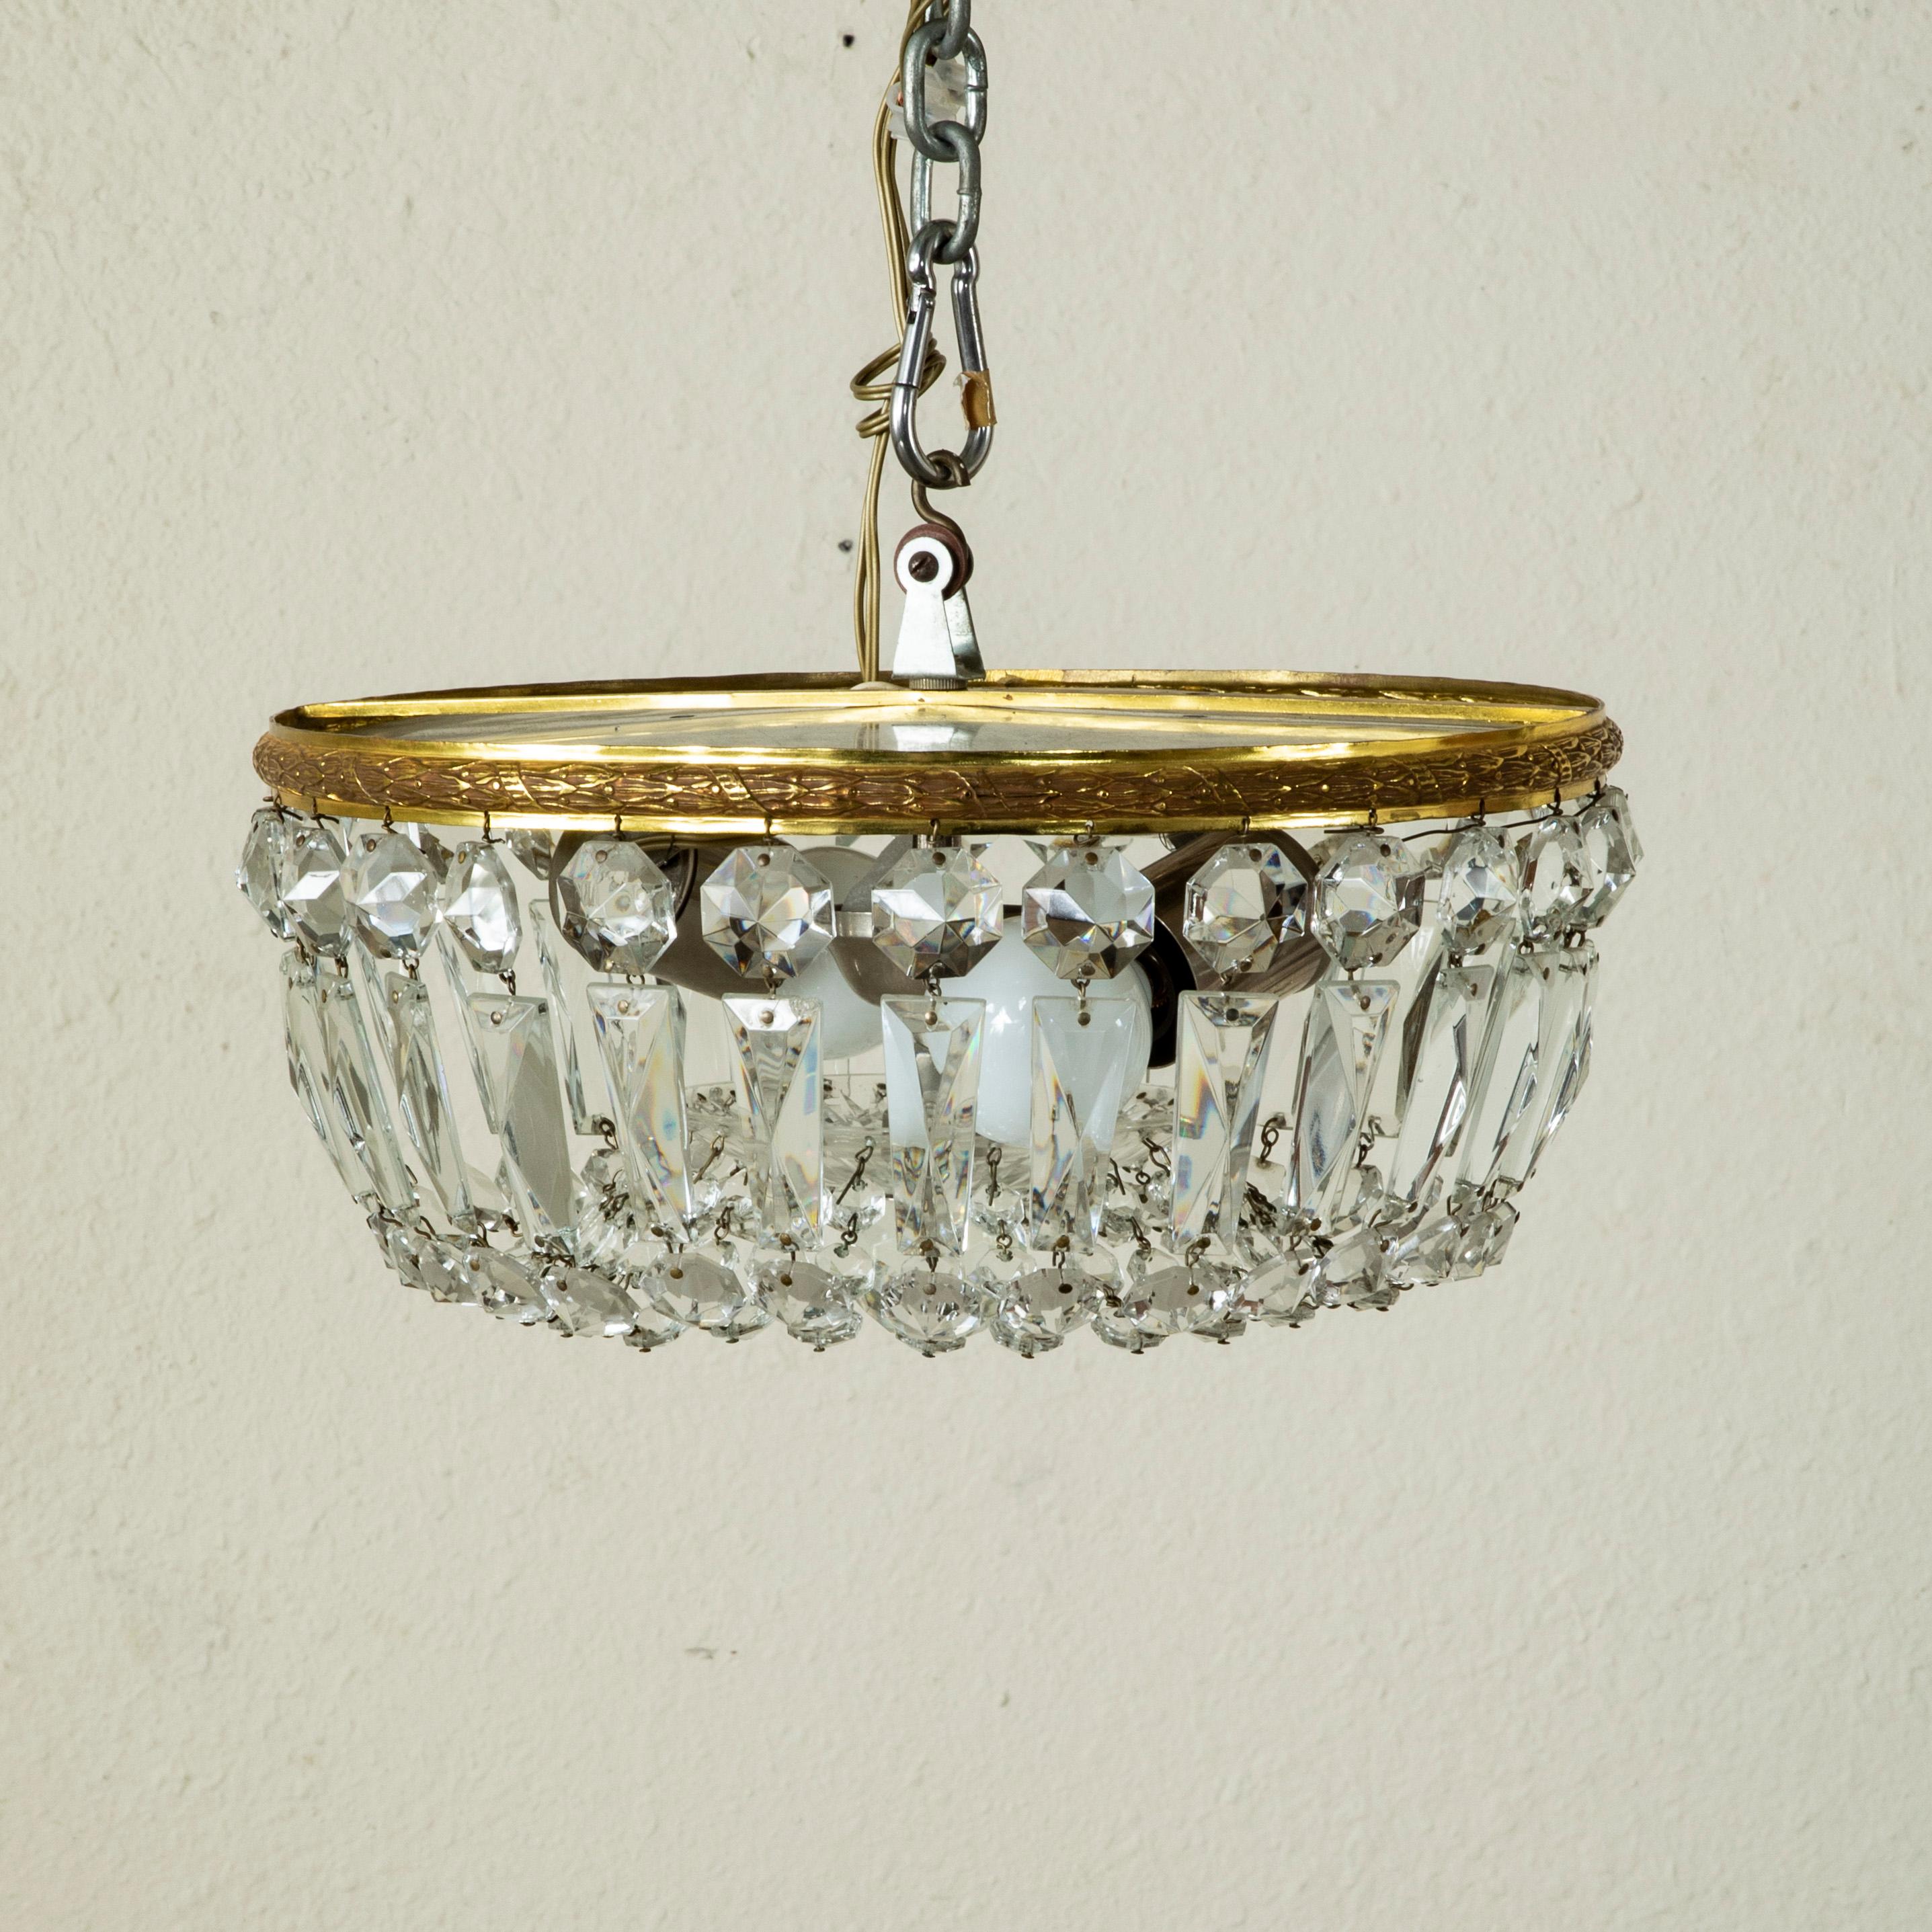 This small scale early twentieth century French flush mount chandelier features an upper bronze ring with a laurel and twisted ribbon motif. Multi-faceted strings of crystal beading drape to meet a central crystal ball. An ideal chandelier for a